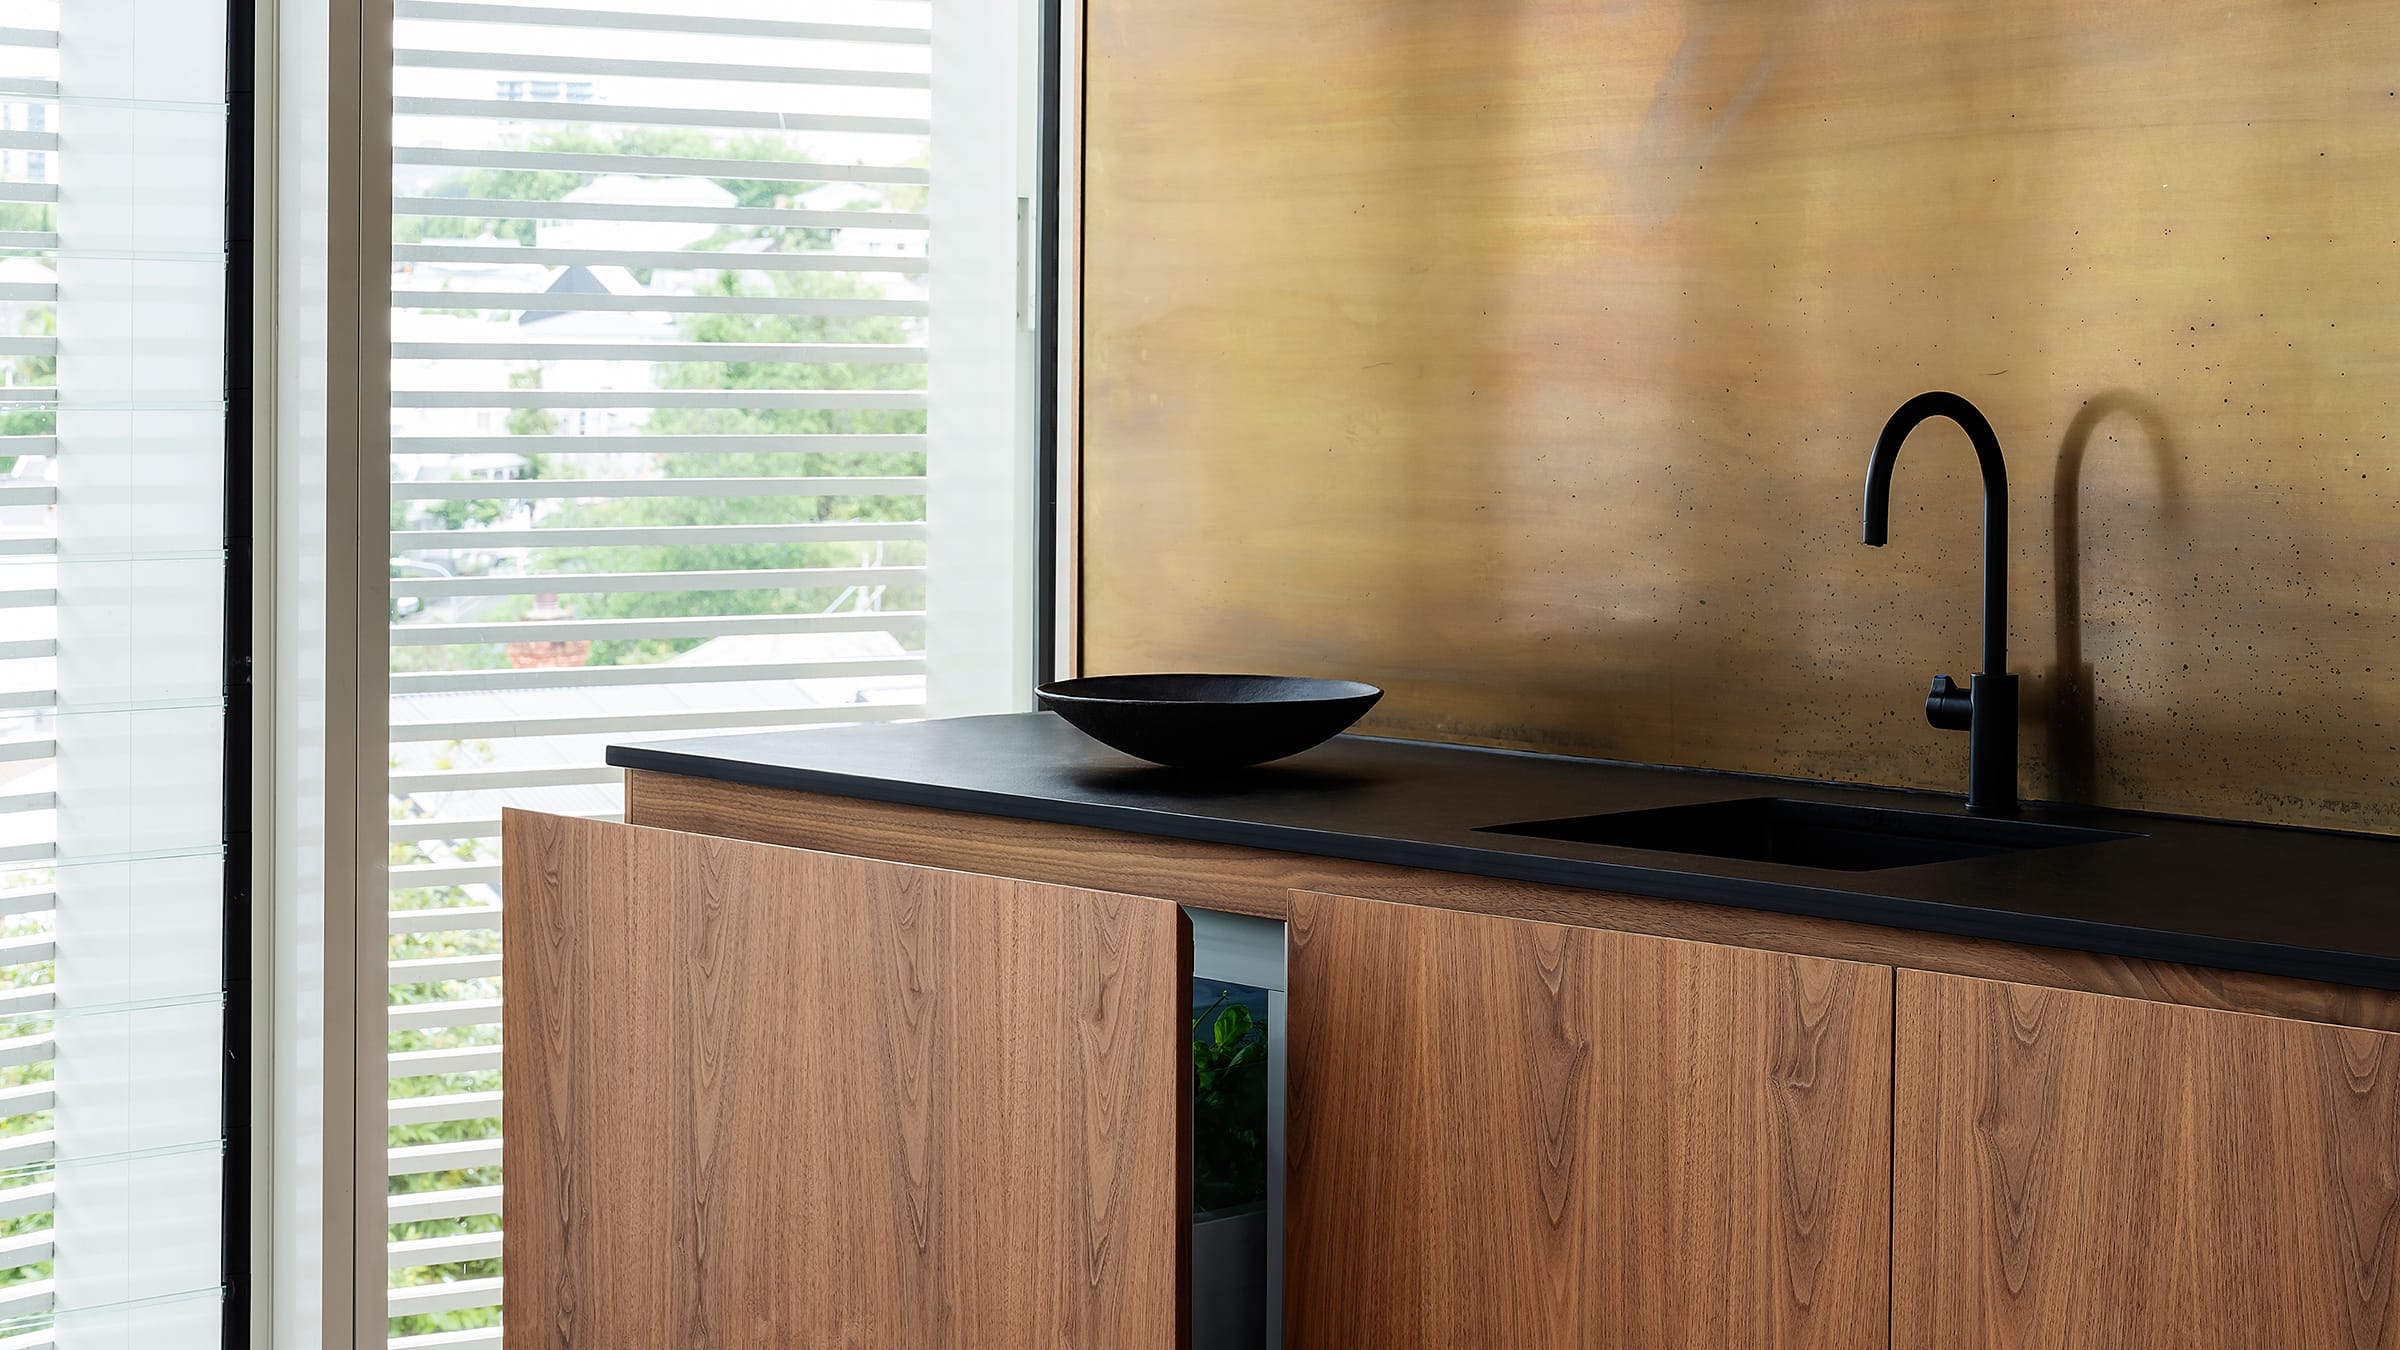 Kitchen details and the Integrated Fisher & Paykel DishDrawer™ Dishwasher